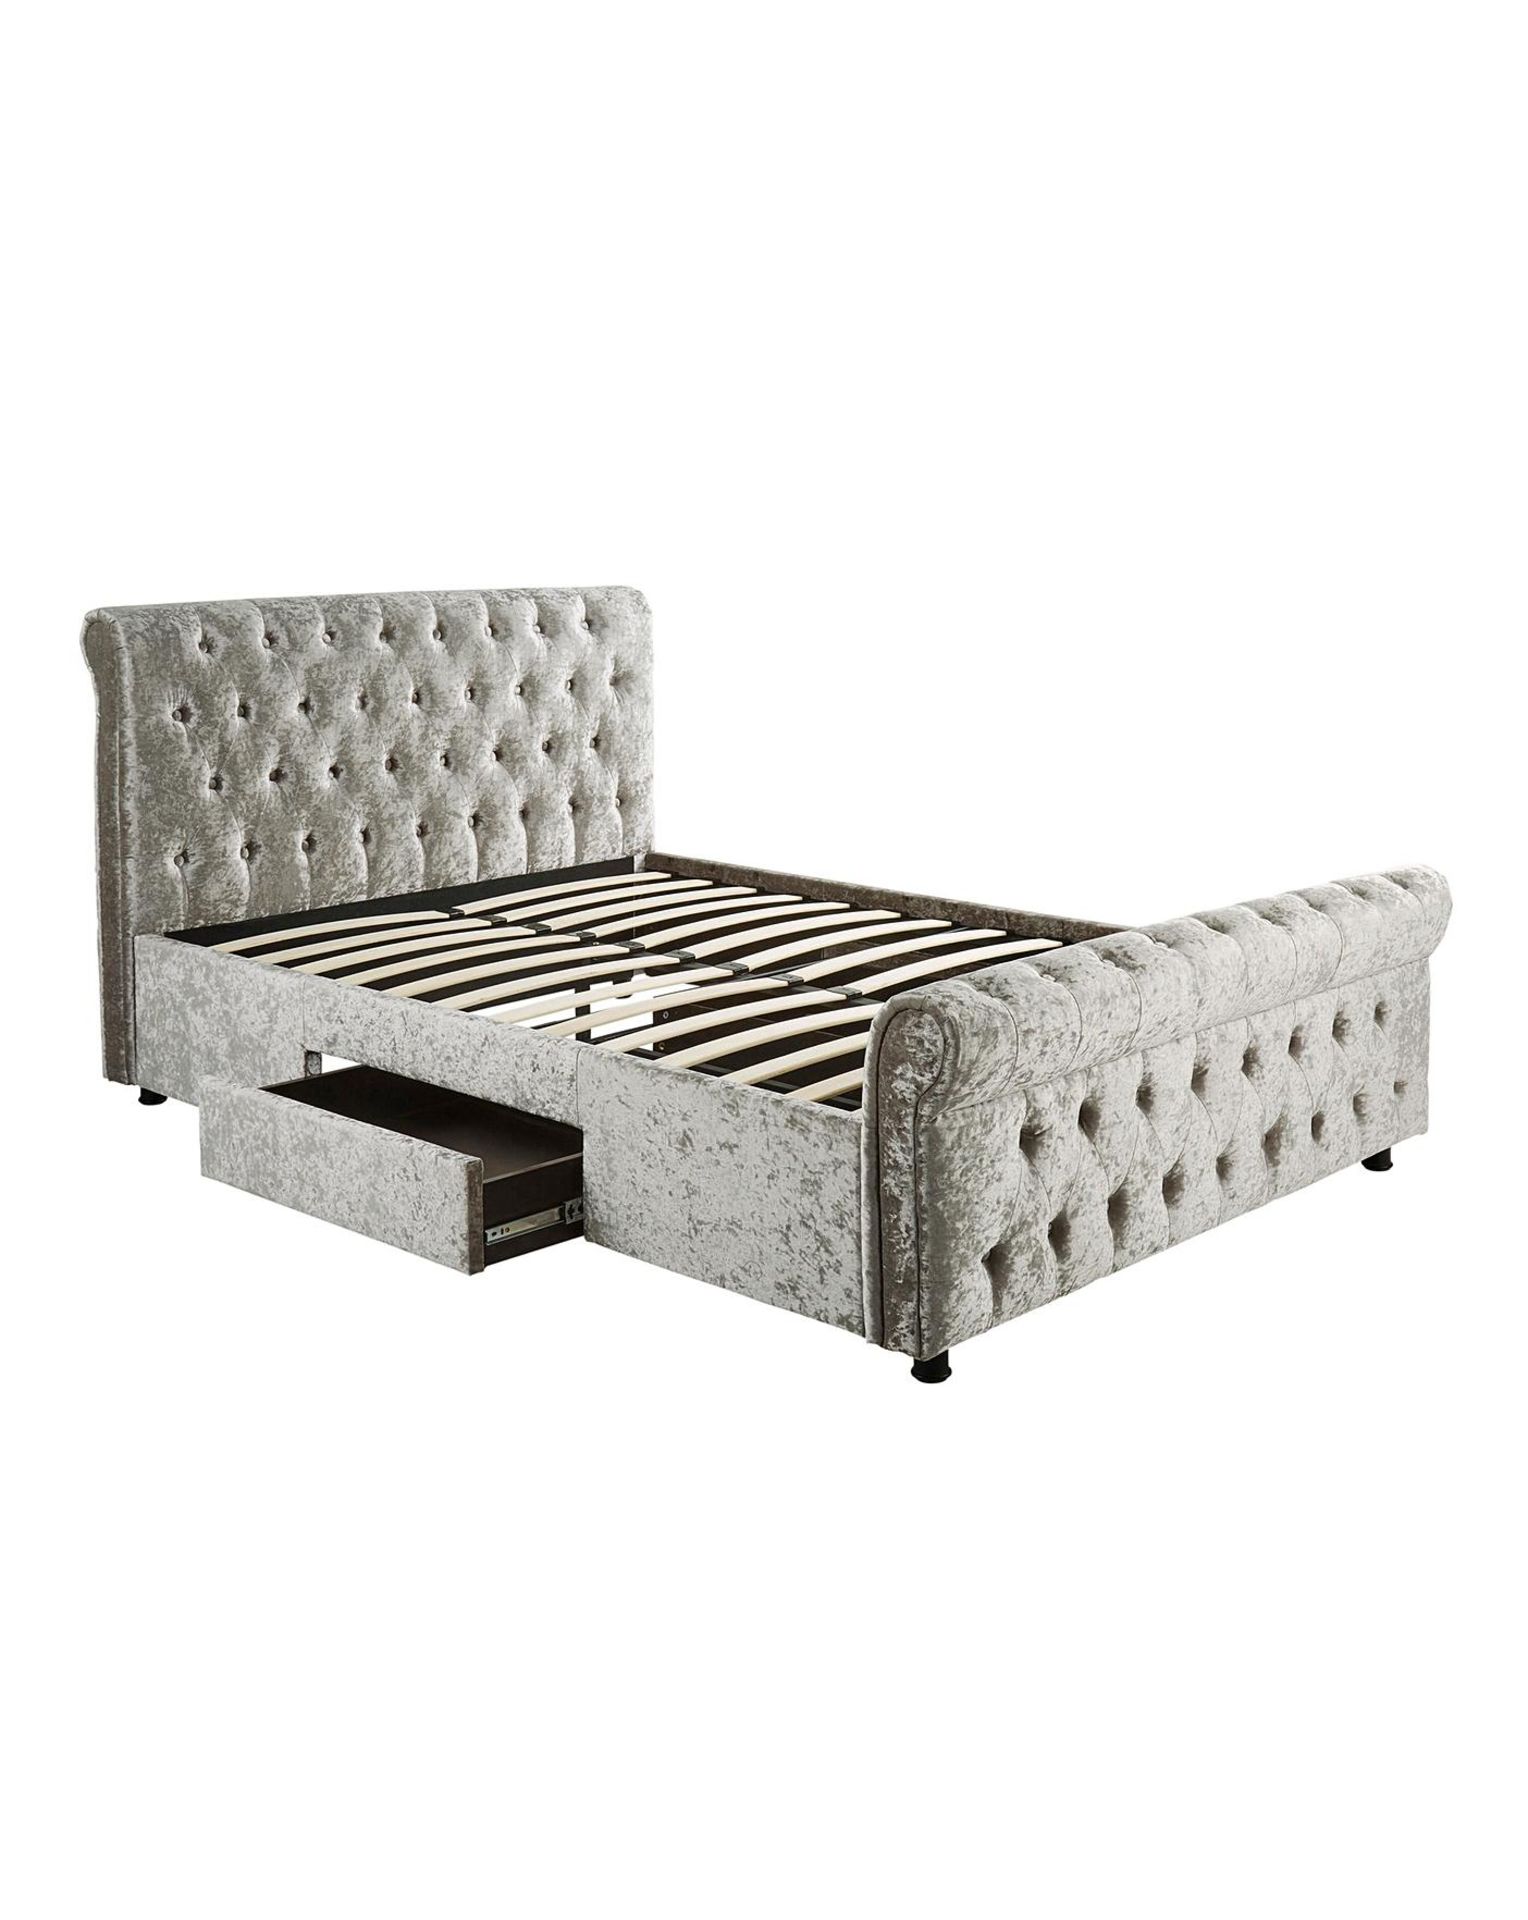 NEW & BOXED KINGSTON Crushed Velvet Bed Frame with 2 Storage Drawers - SILVER. RRP £549. The - Bild 3 aus 3